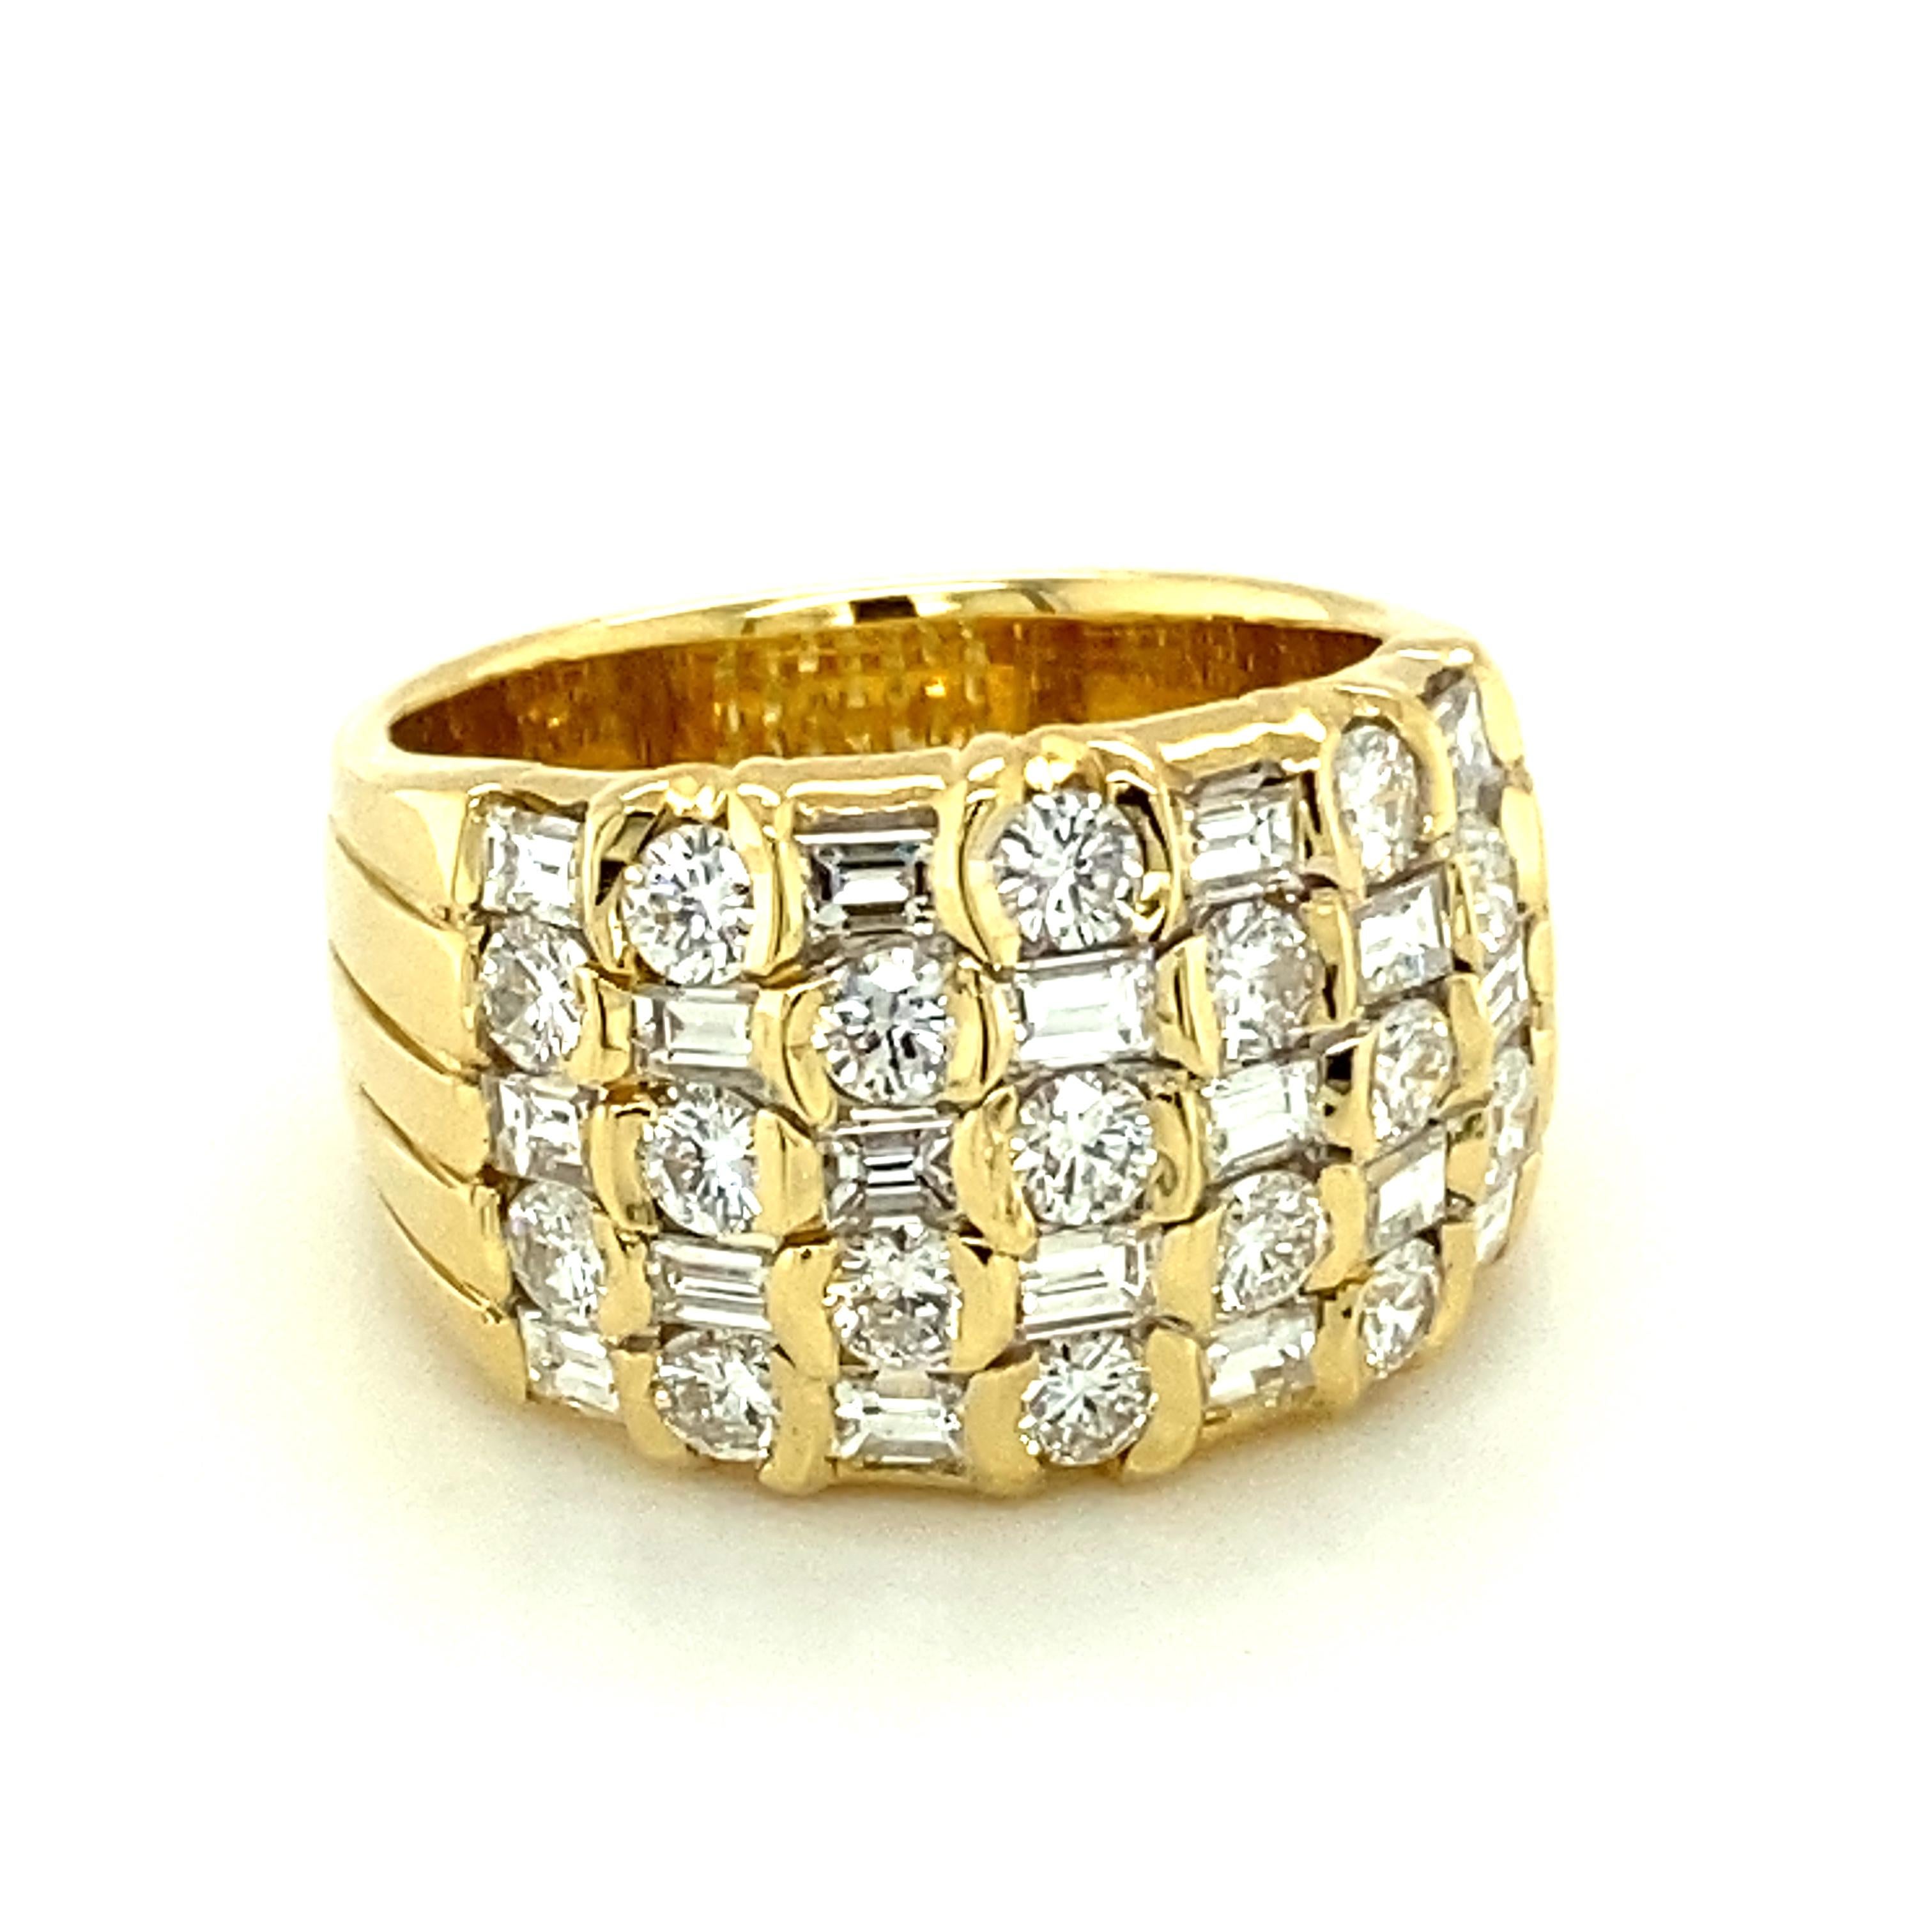 With its refined combination of brilliant-cut and baguette-cut diamonds, this ring ignites a real firework display! 
The setting in 18 karat yellow gold is alternately set with 17 round-cut and 18 rectangular-cut diamonds, checkerboard style, with